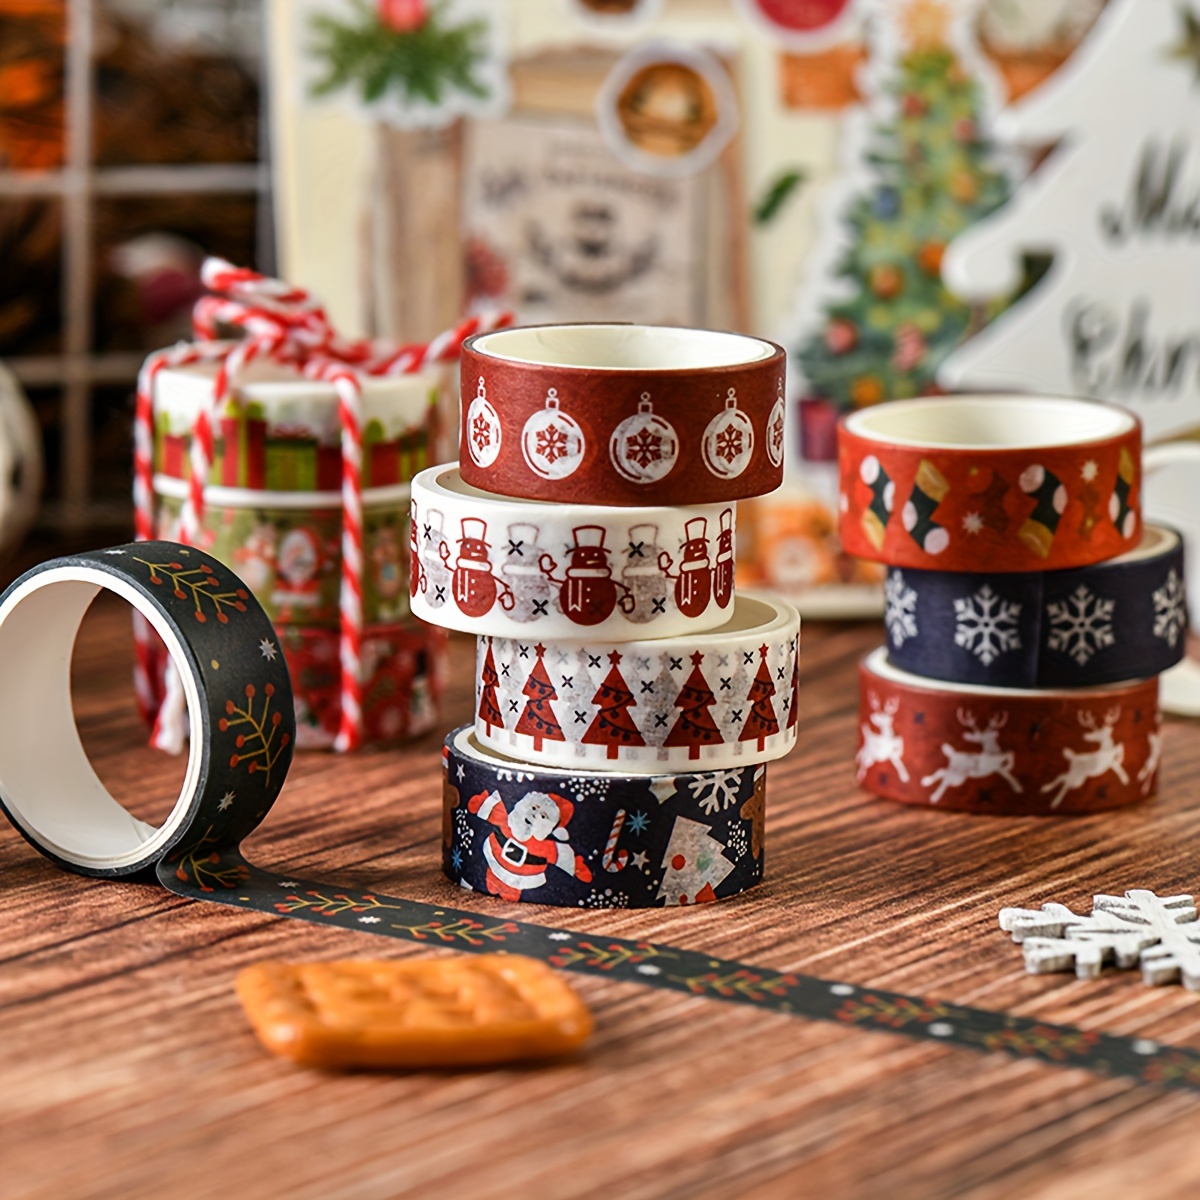 10 Rolls Winter Washi Tape Tapes Christmas Decor Account Crafts